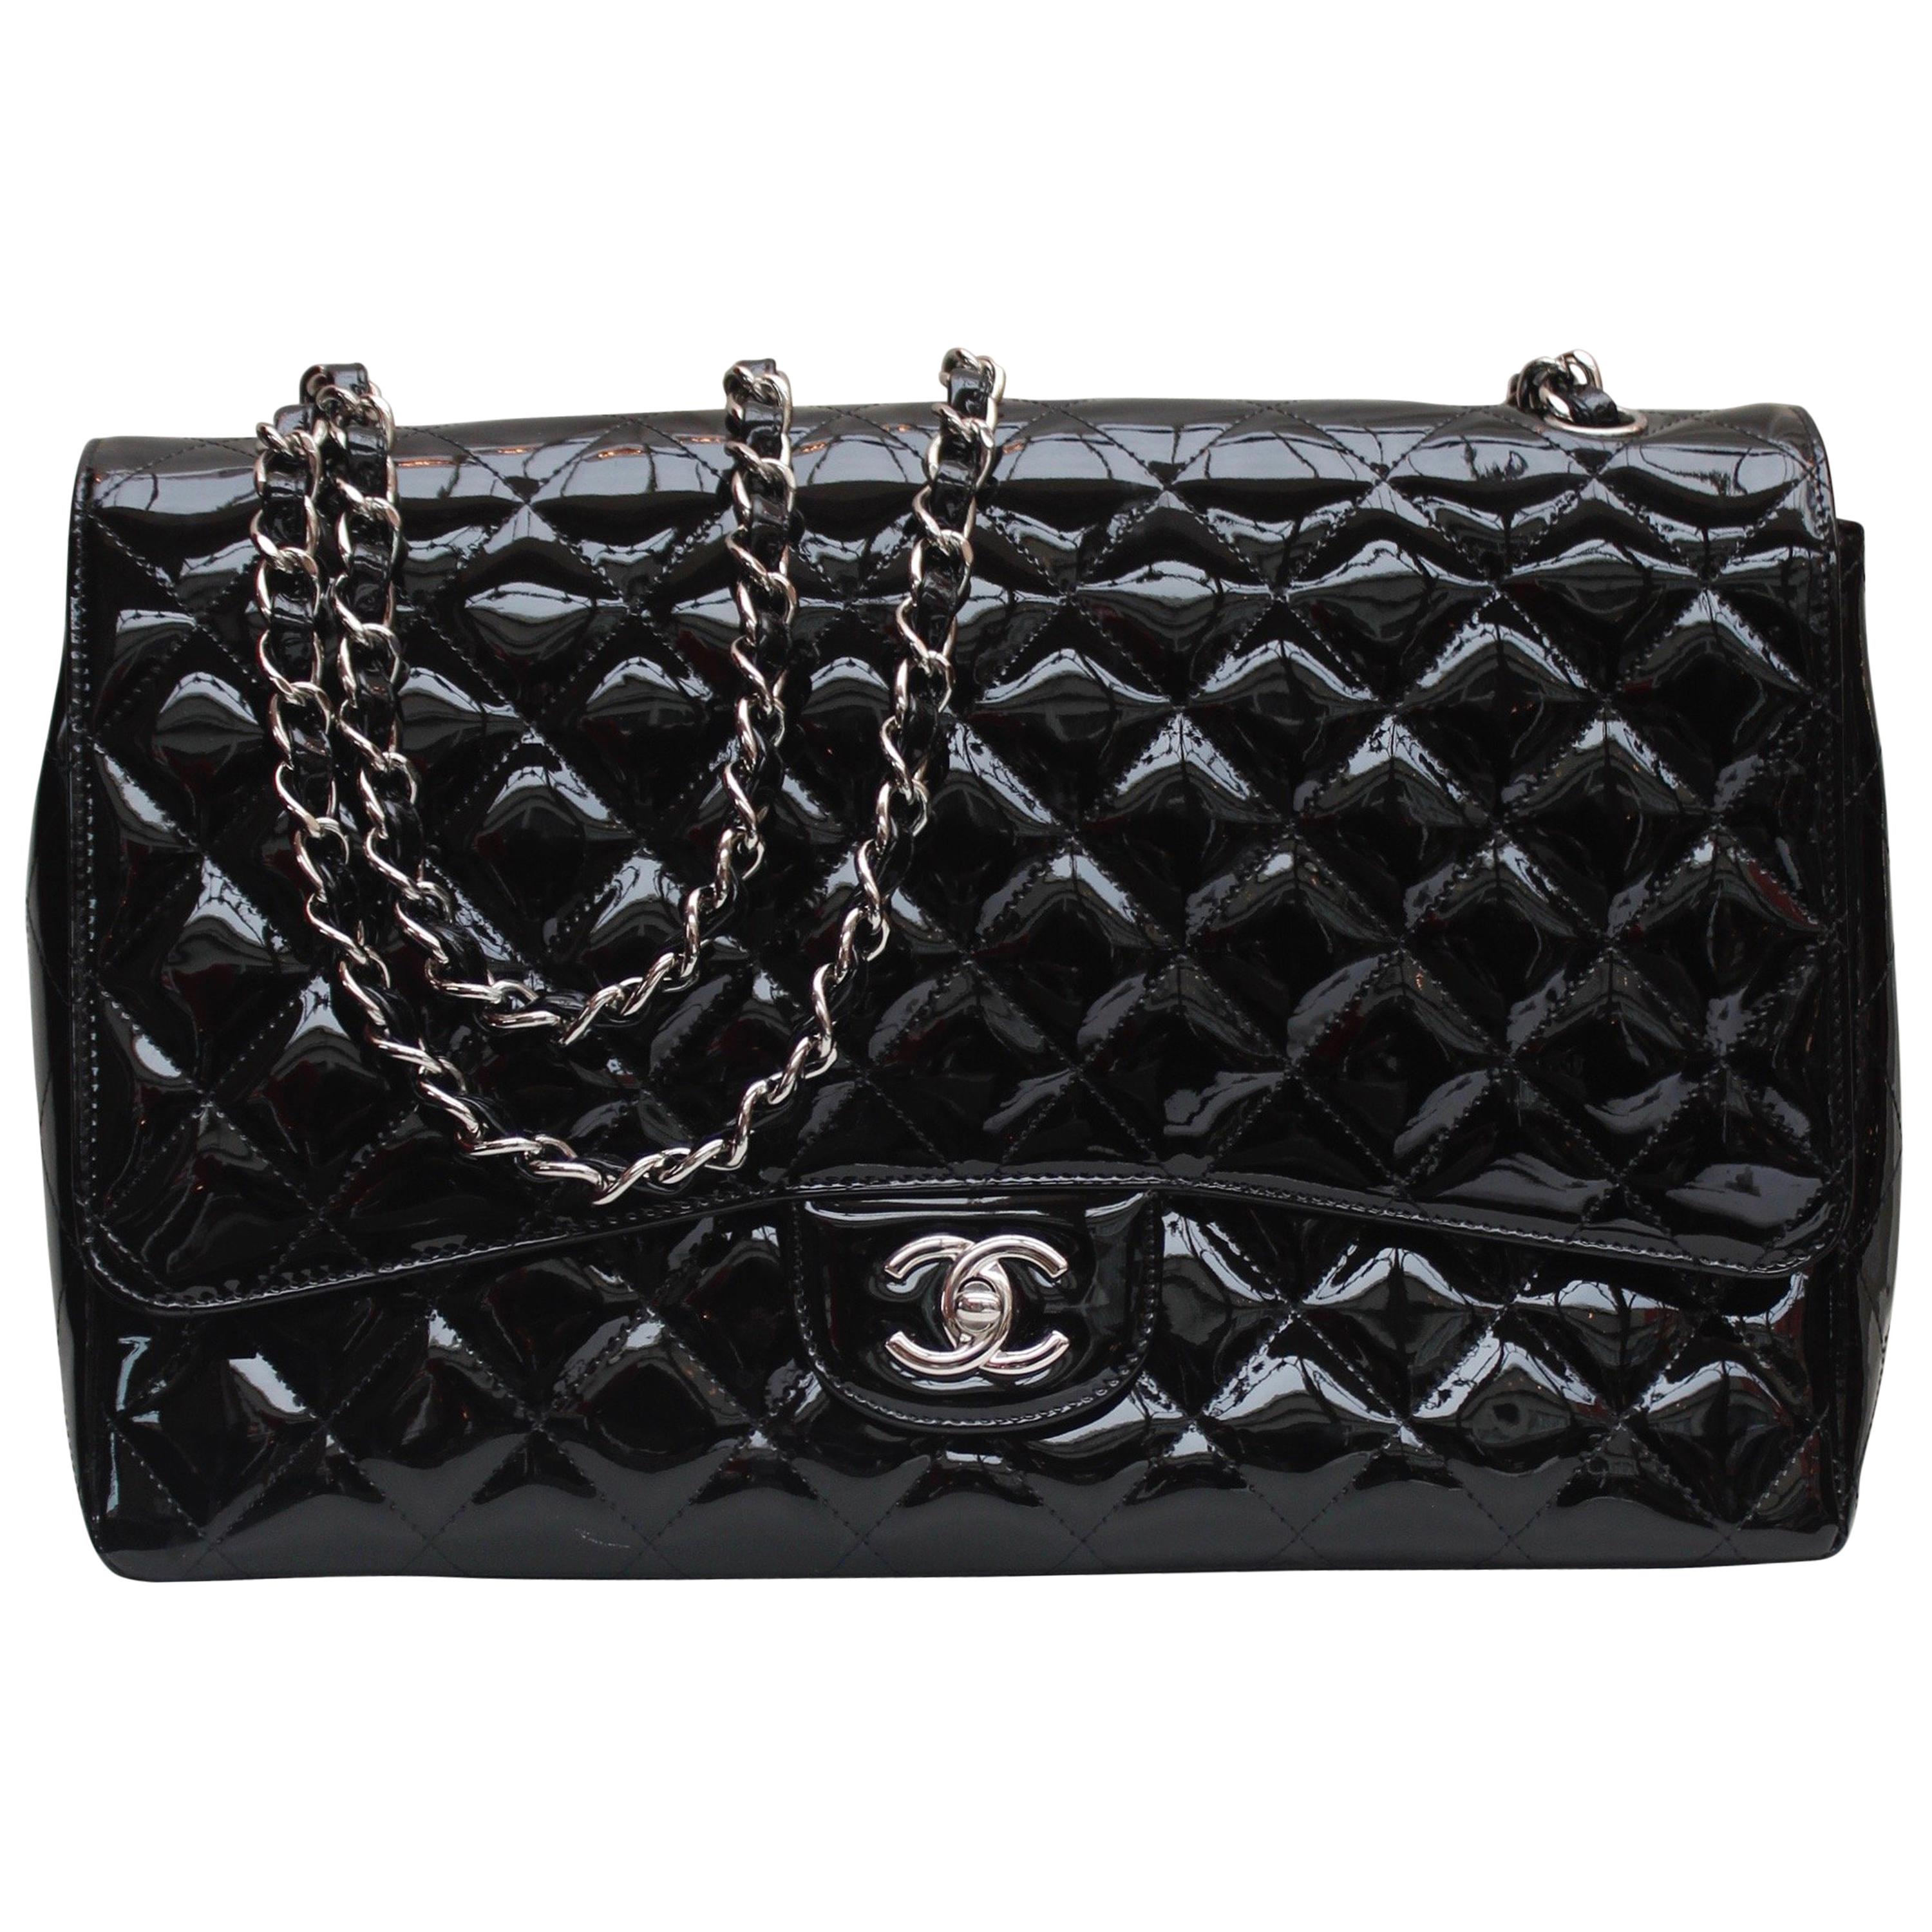 Chanel gorgeous black patent leather, 2009 – 2010